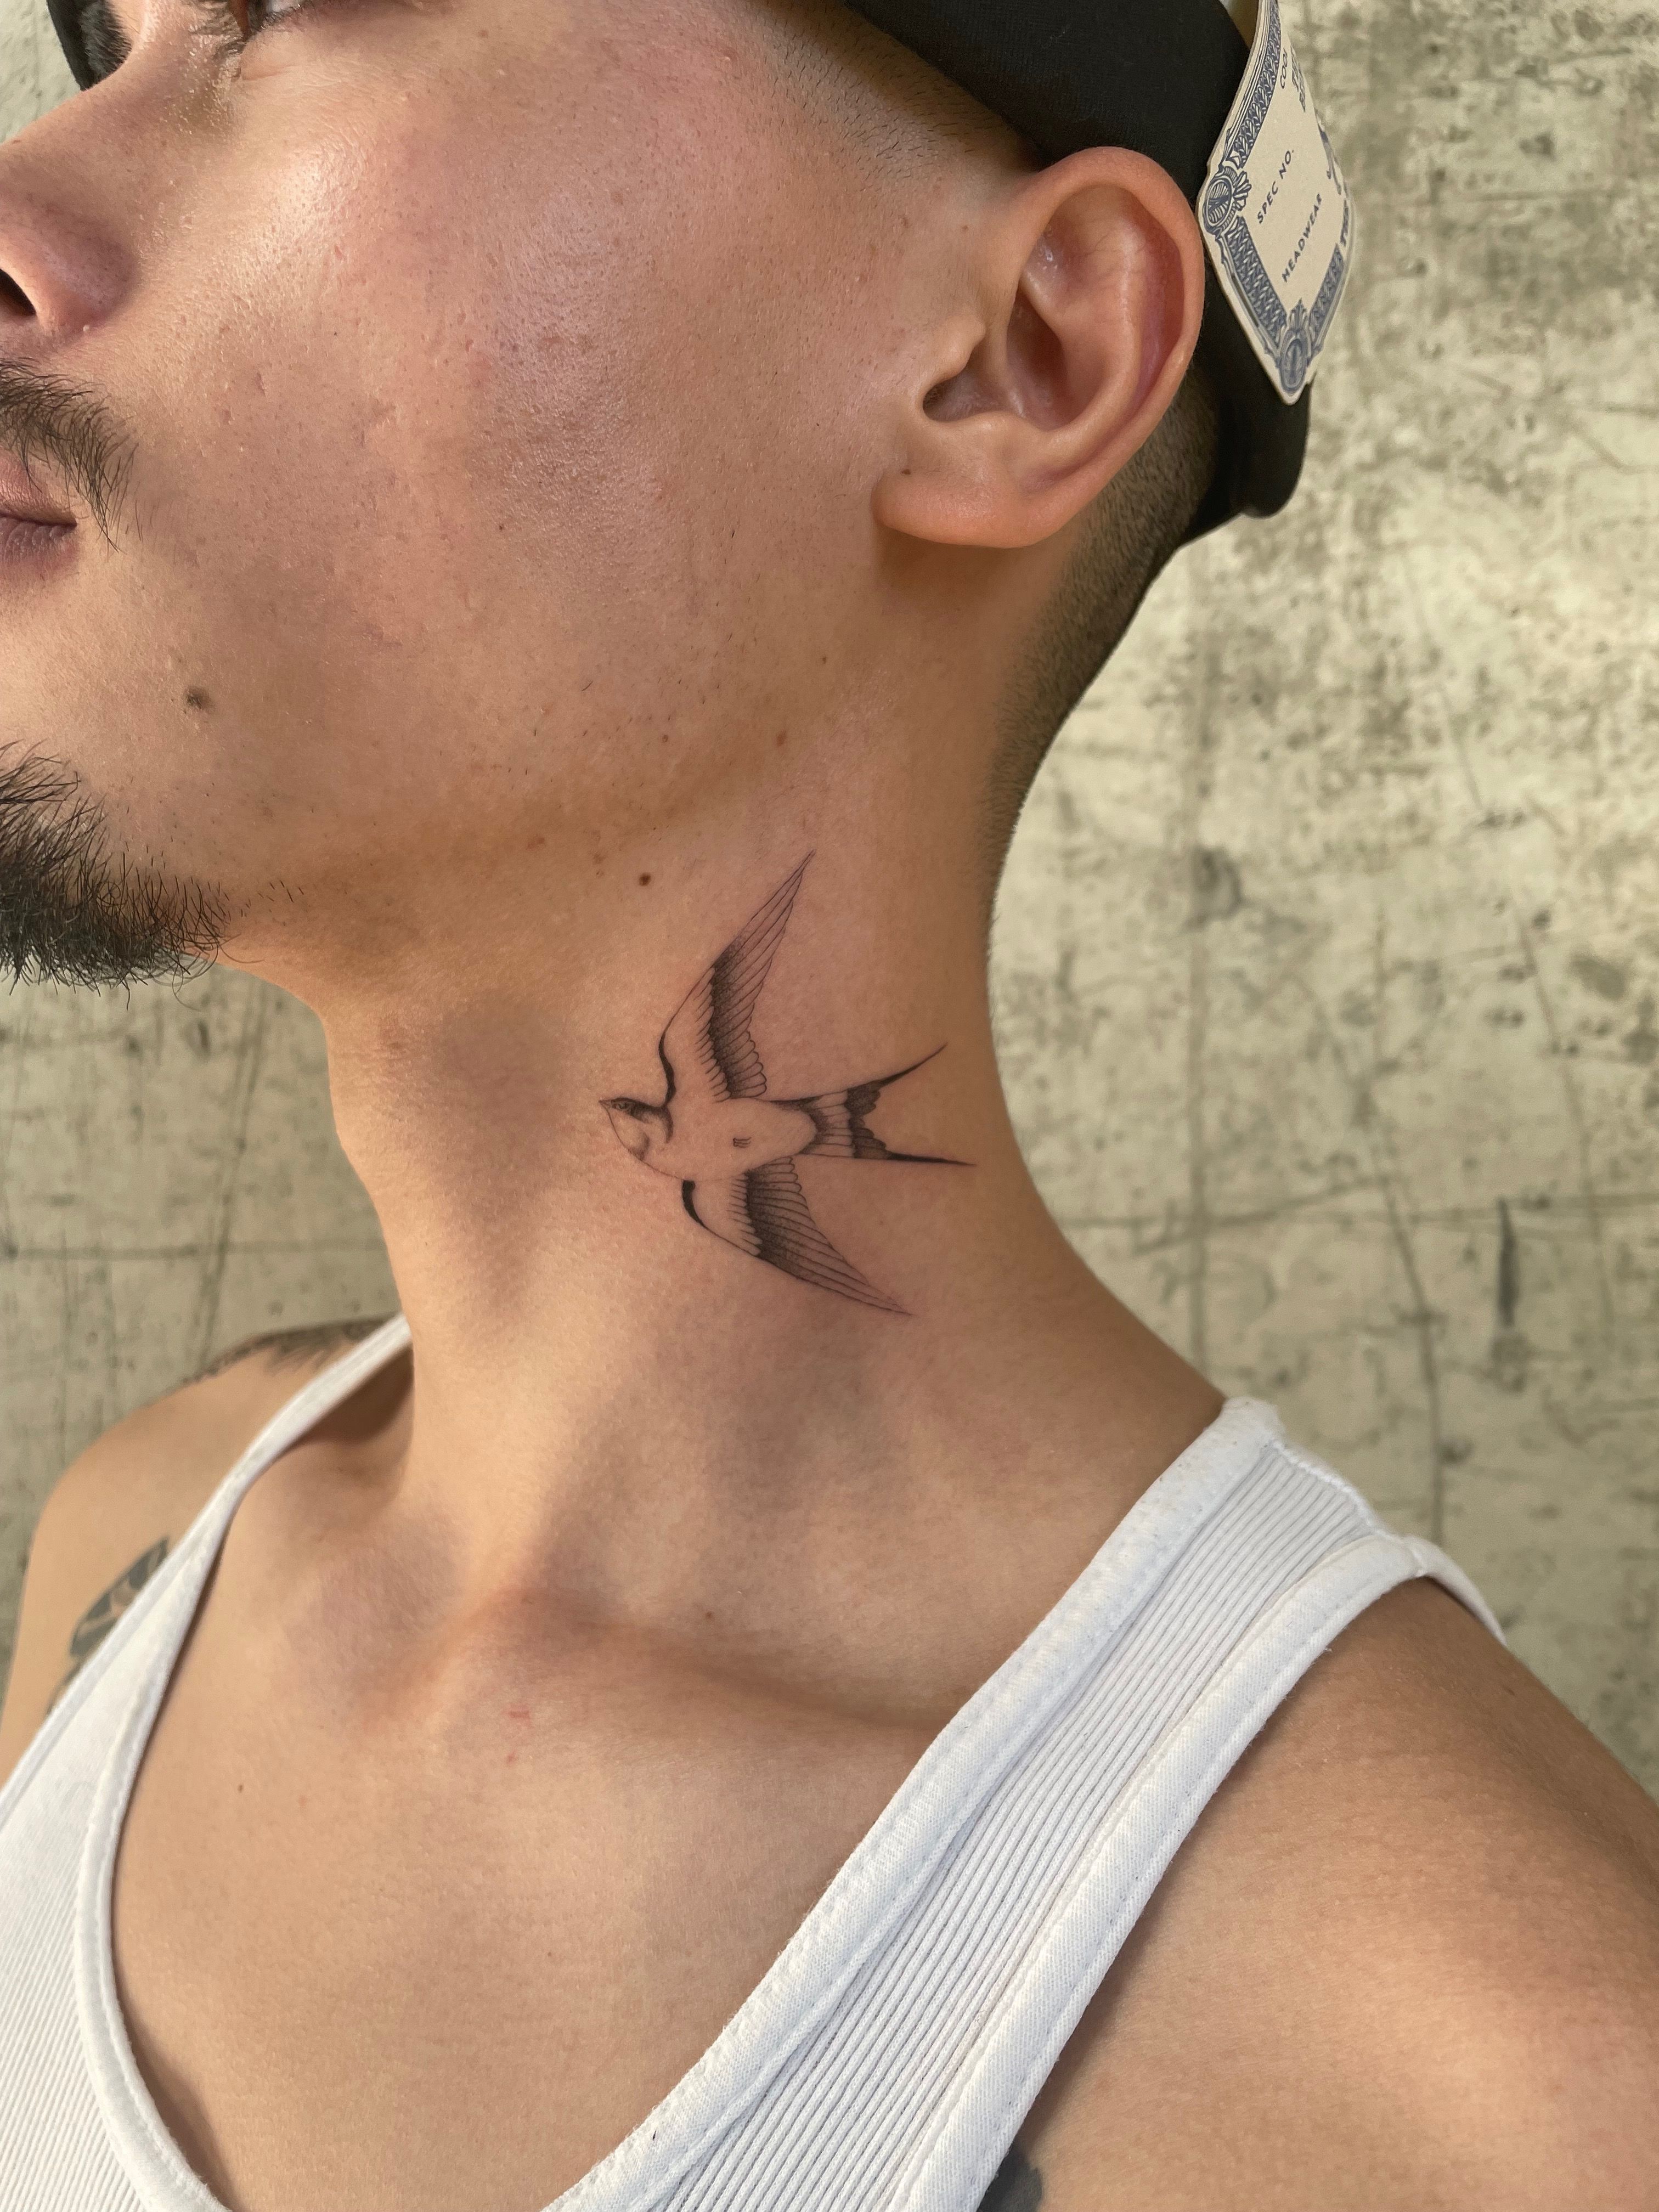 Minimalist Tattoo Art By JonBoy That Will Inspire You To Get Inked |  DeMilked